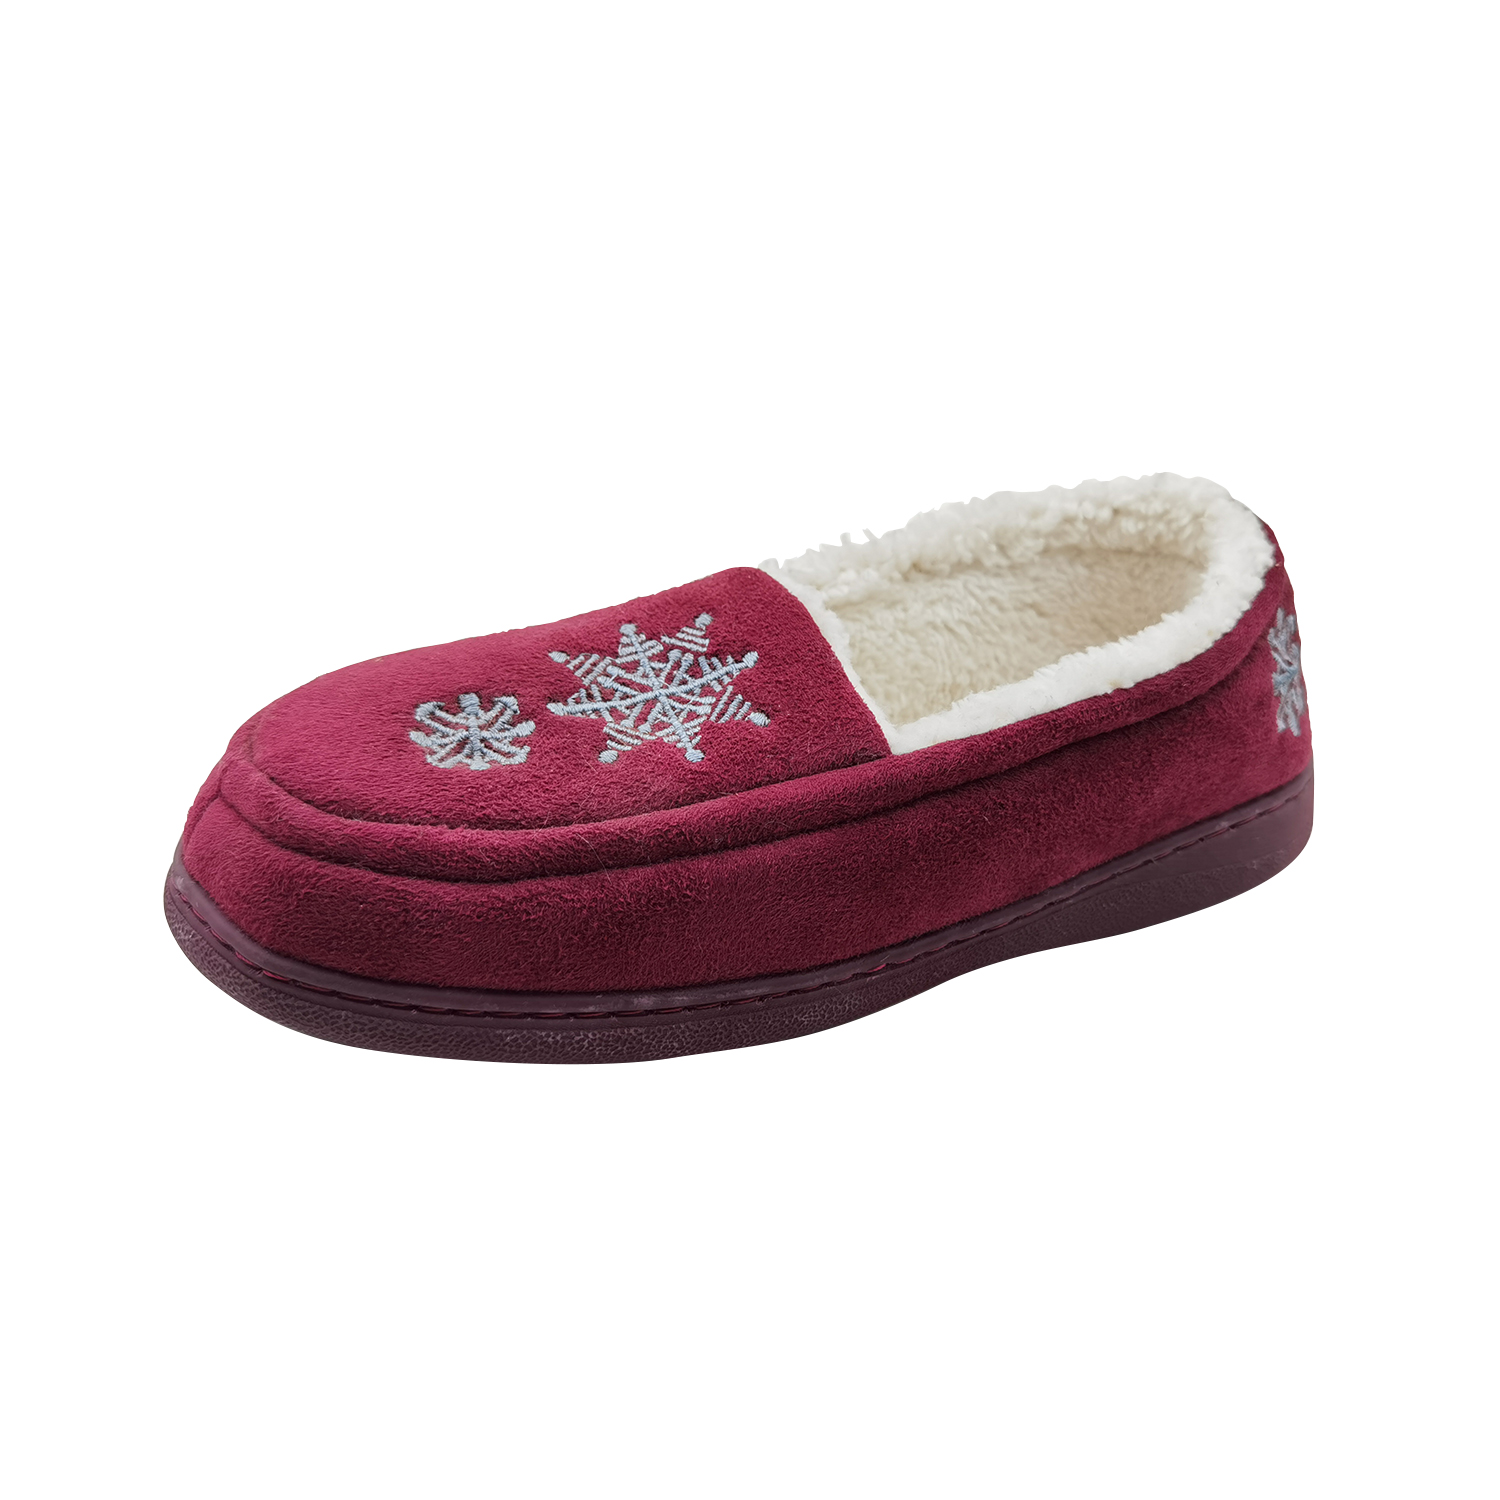 Women's Snow Embroidery Warm Slippers Indoor Shoes